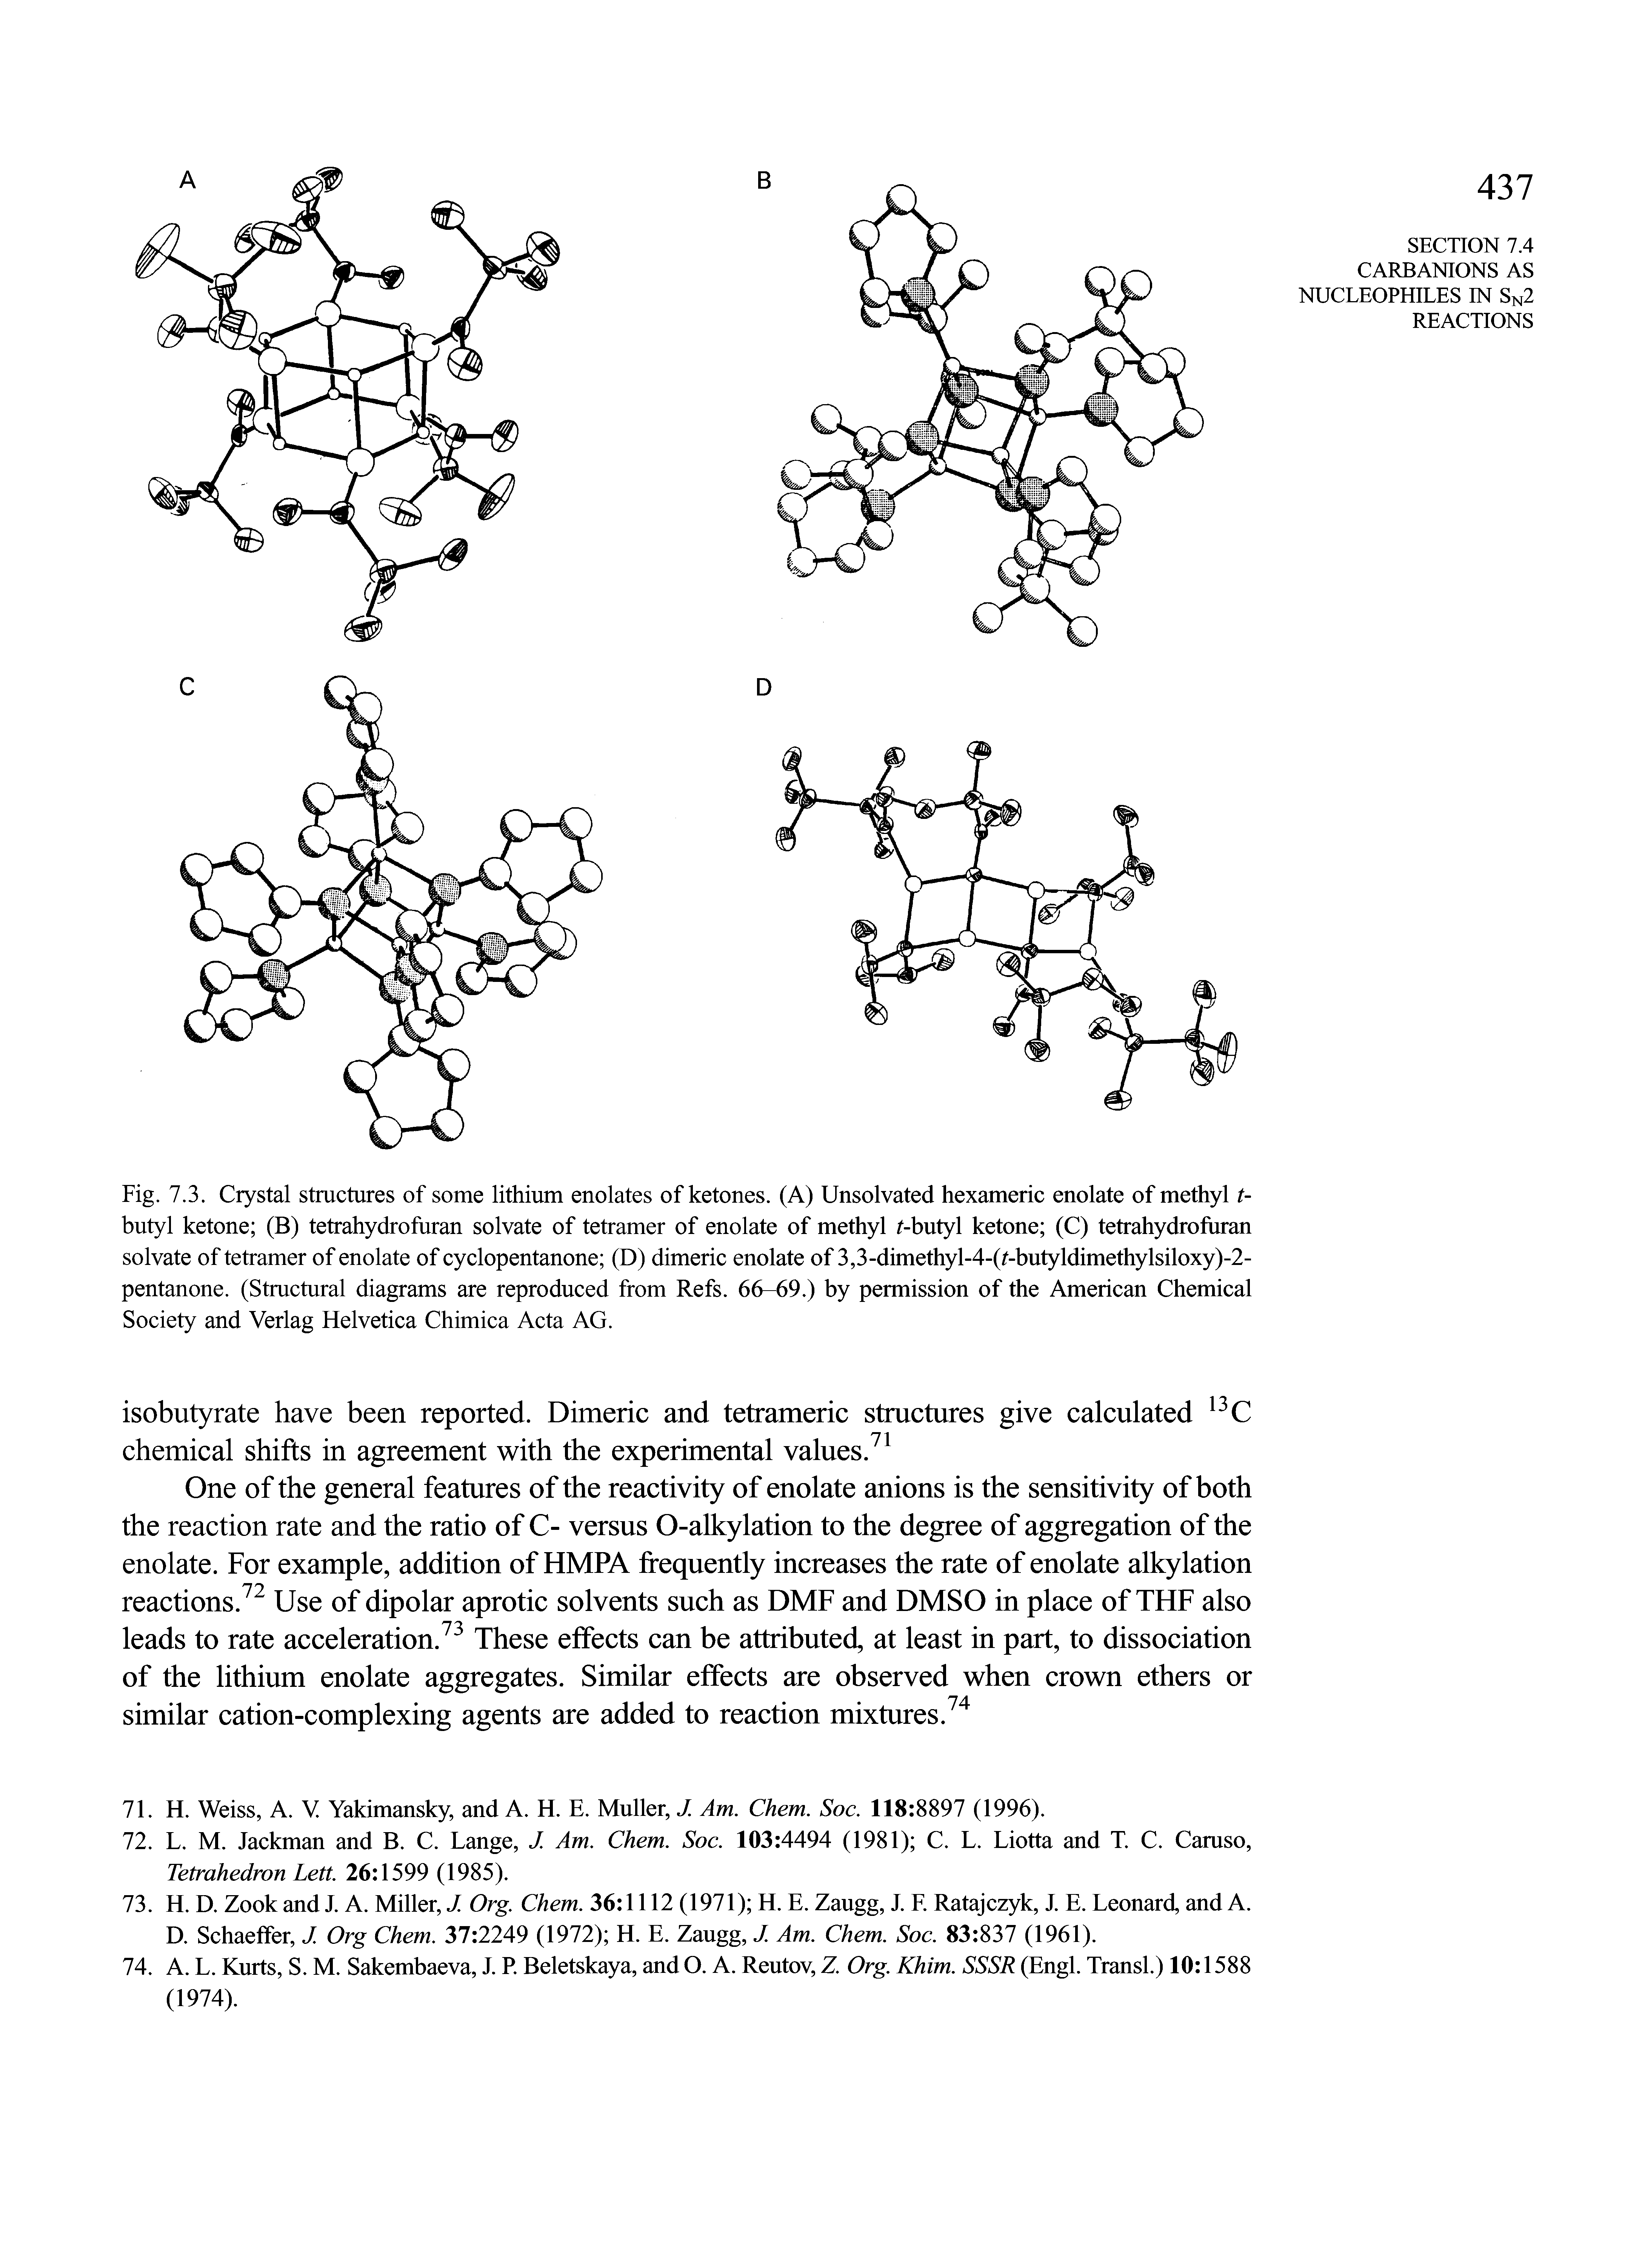 Fig. 7.3. Crystal structures of some lithium enolates of ketones. (A) Unsolvated hexameric enolate of methyl t-butyl ketone (B) tetrahydrofuran solvate of tetramer of enolate of methyl r-butyl ketone (C) tetrahydrofuran solvate of tetramer of enolate of cyclopentanone (D) dimeric enolate of 3,3-dimethyl-4-(f-butyldimethylsiloxy)-2-pentanone. (Structural diagrams are reproduced from Refs. 66-69.) by permission of the American Chemical Society and Verlag Helvetica Chimica Acta AG.